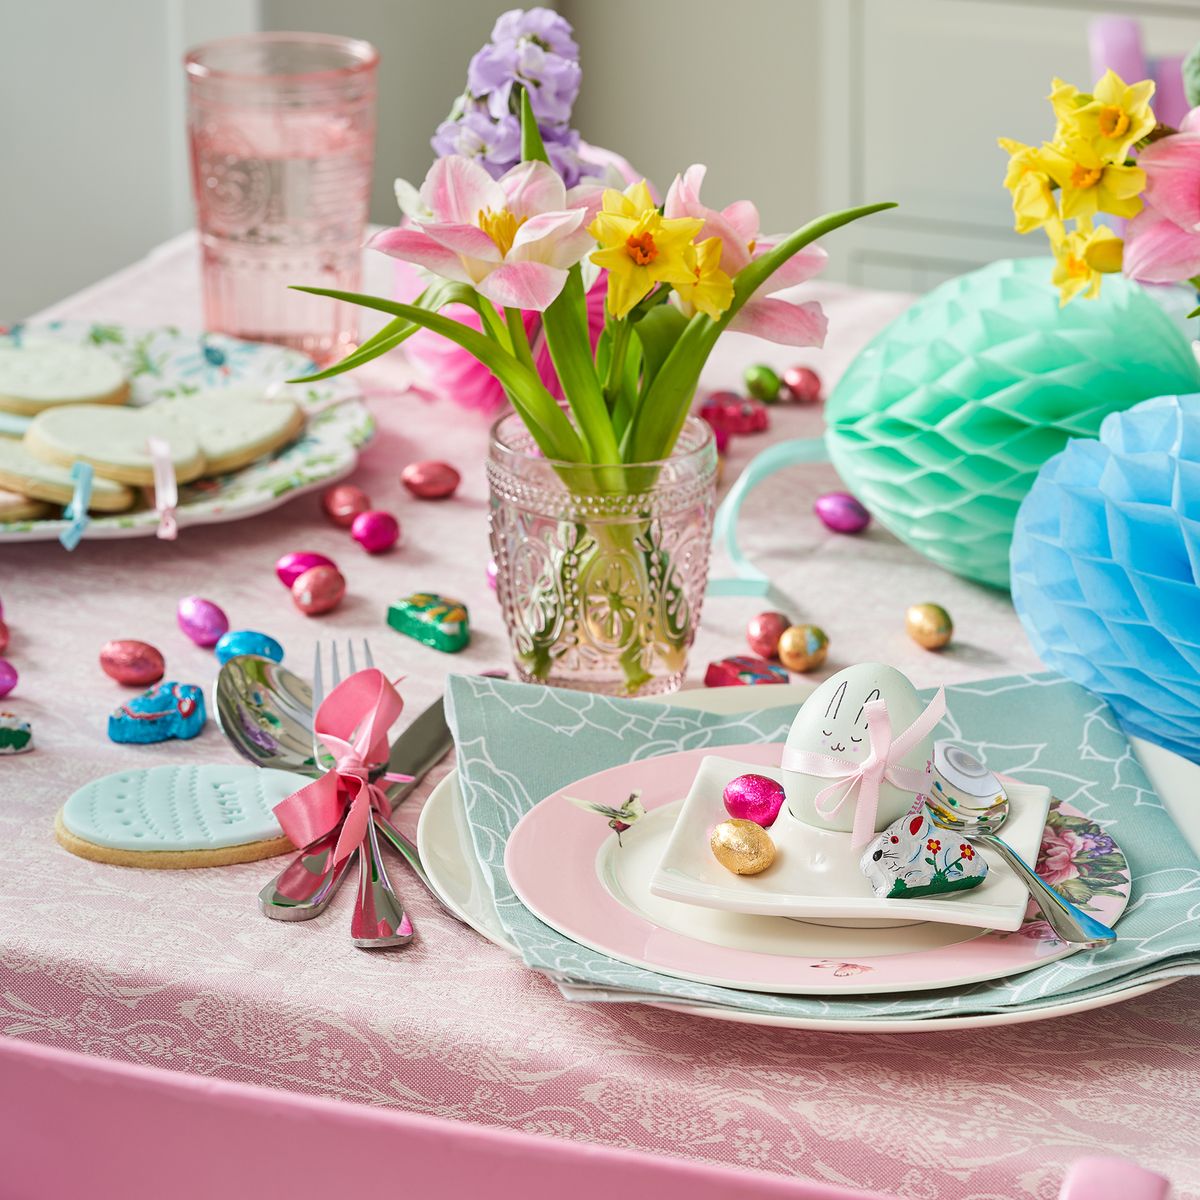 6 stylist's tricks for decorating an Easter table like a pro